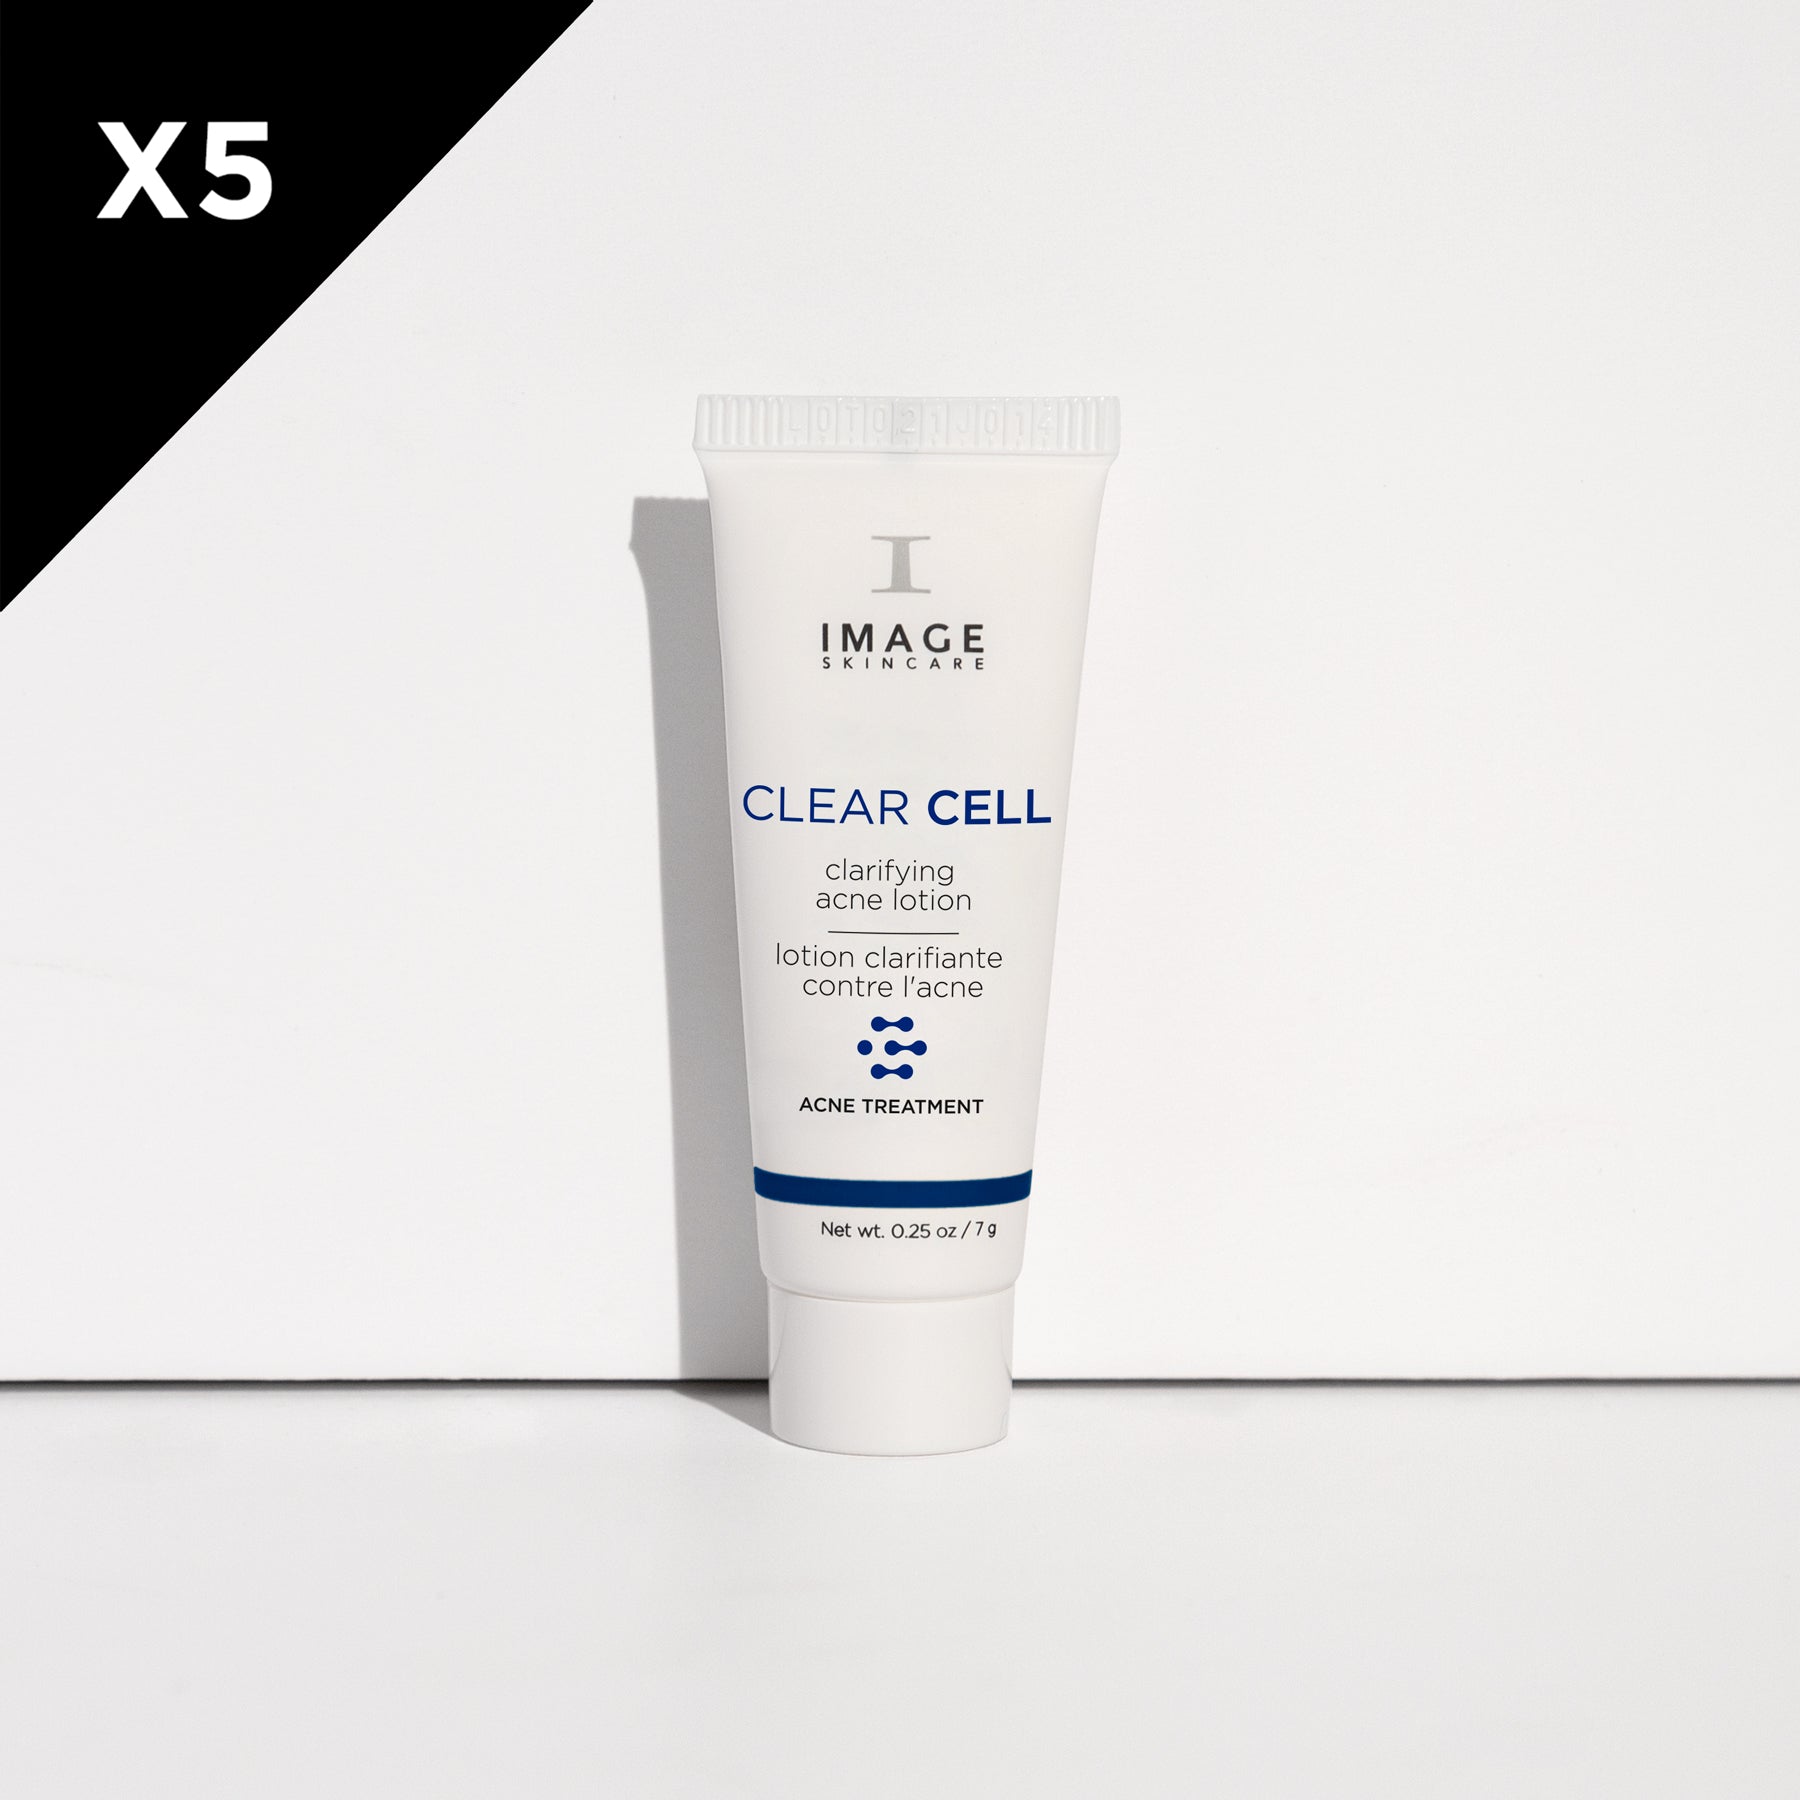 CLEAR CELL clarifying acne lotion 5-pack